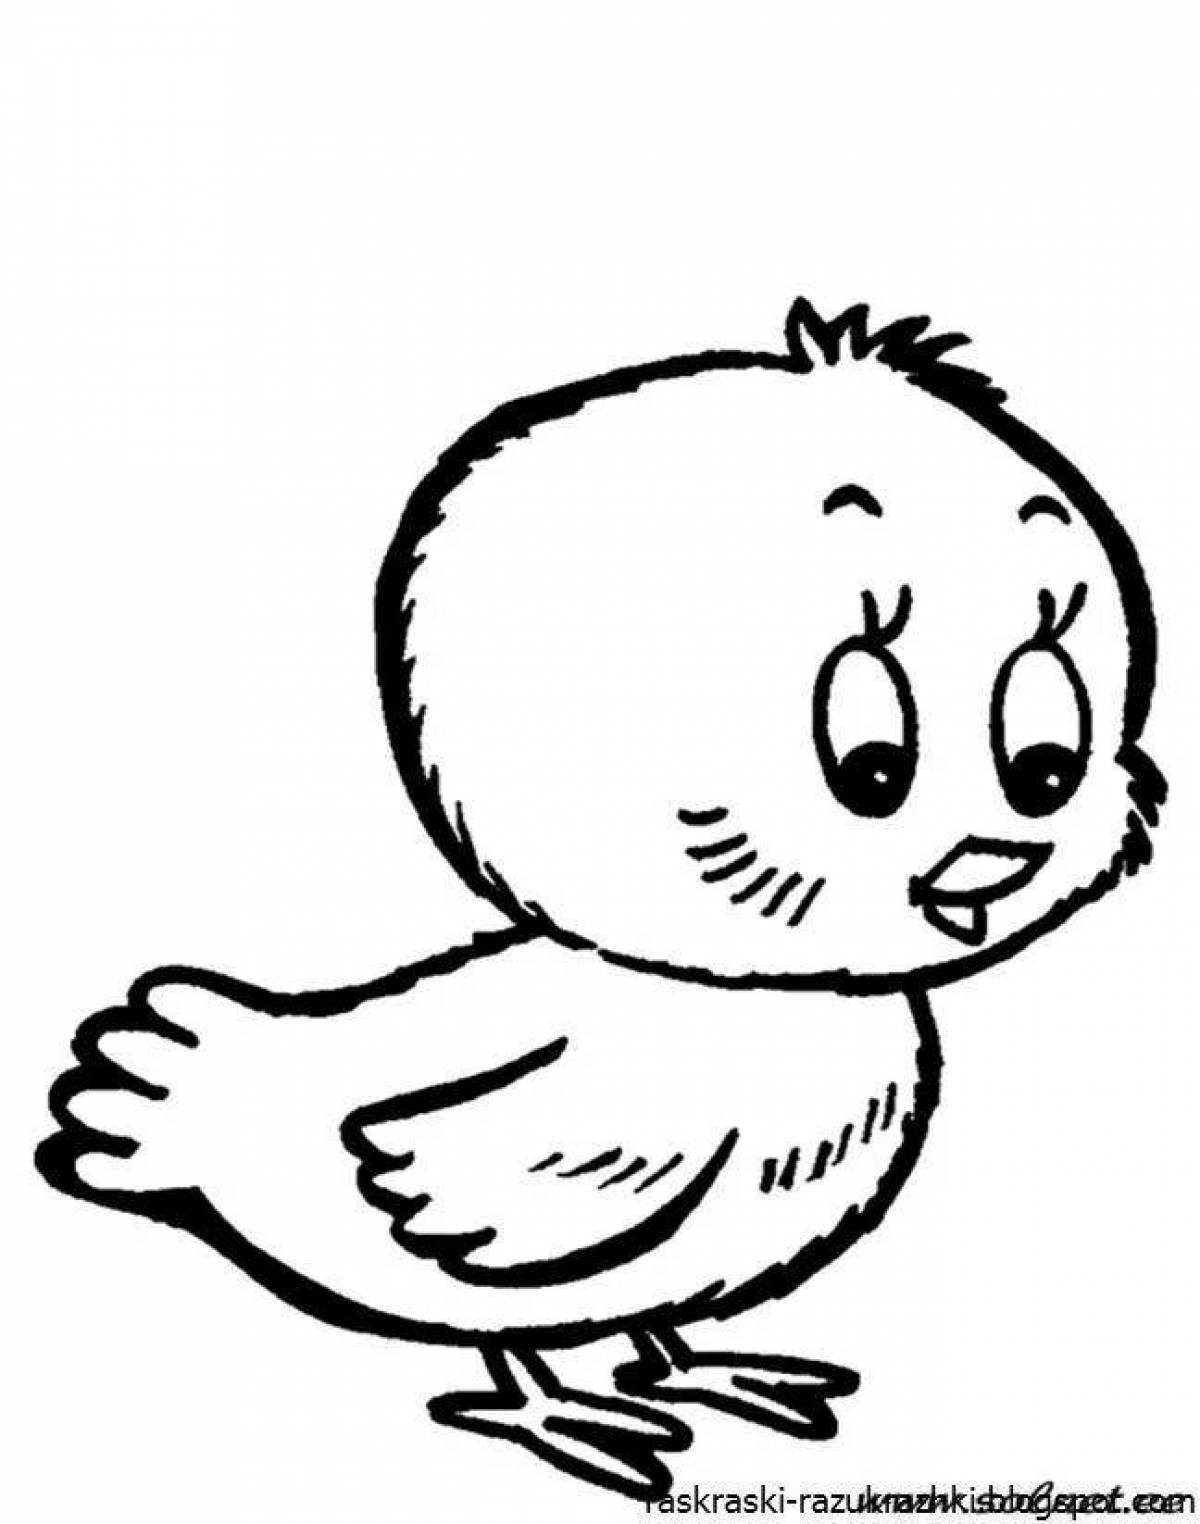 Adorable chick coloring book for 4-5 year olds